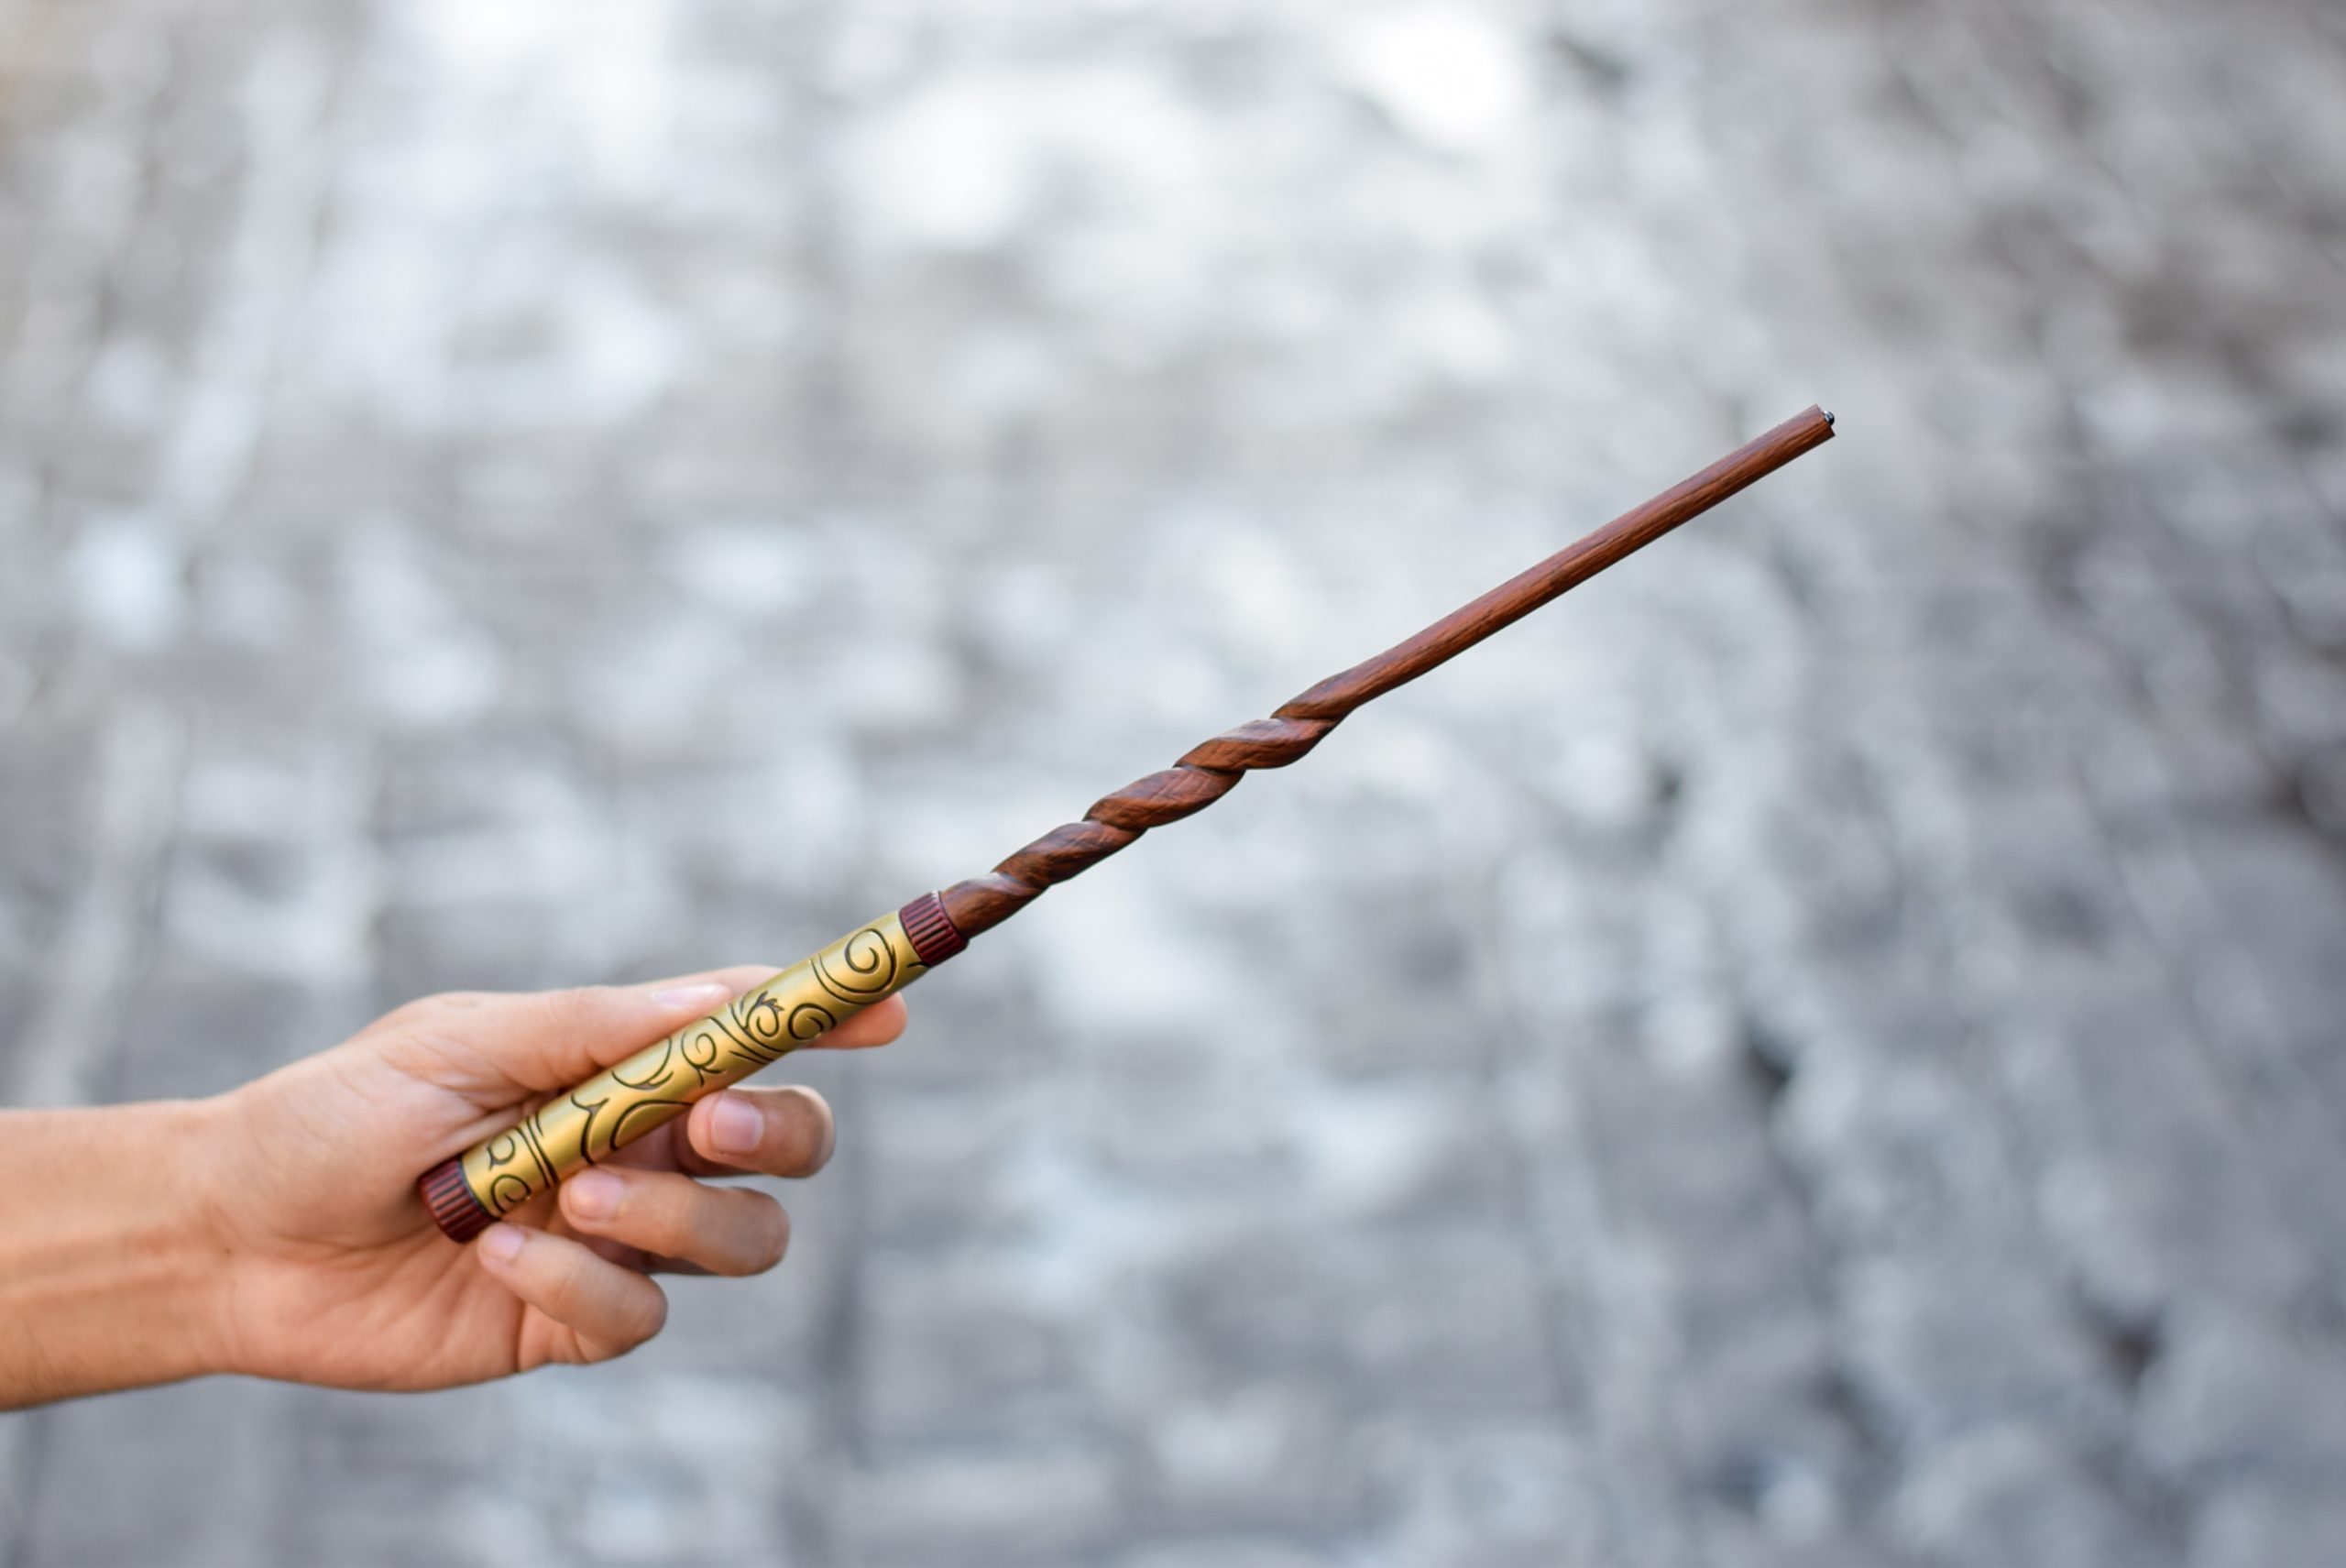 New Collection of Wizarding World of Harry Potter Interactive Wands debuts  at Universal Parks | Inside Universal